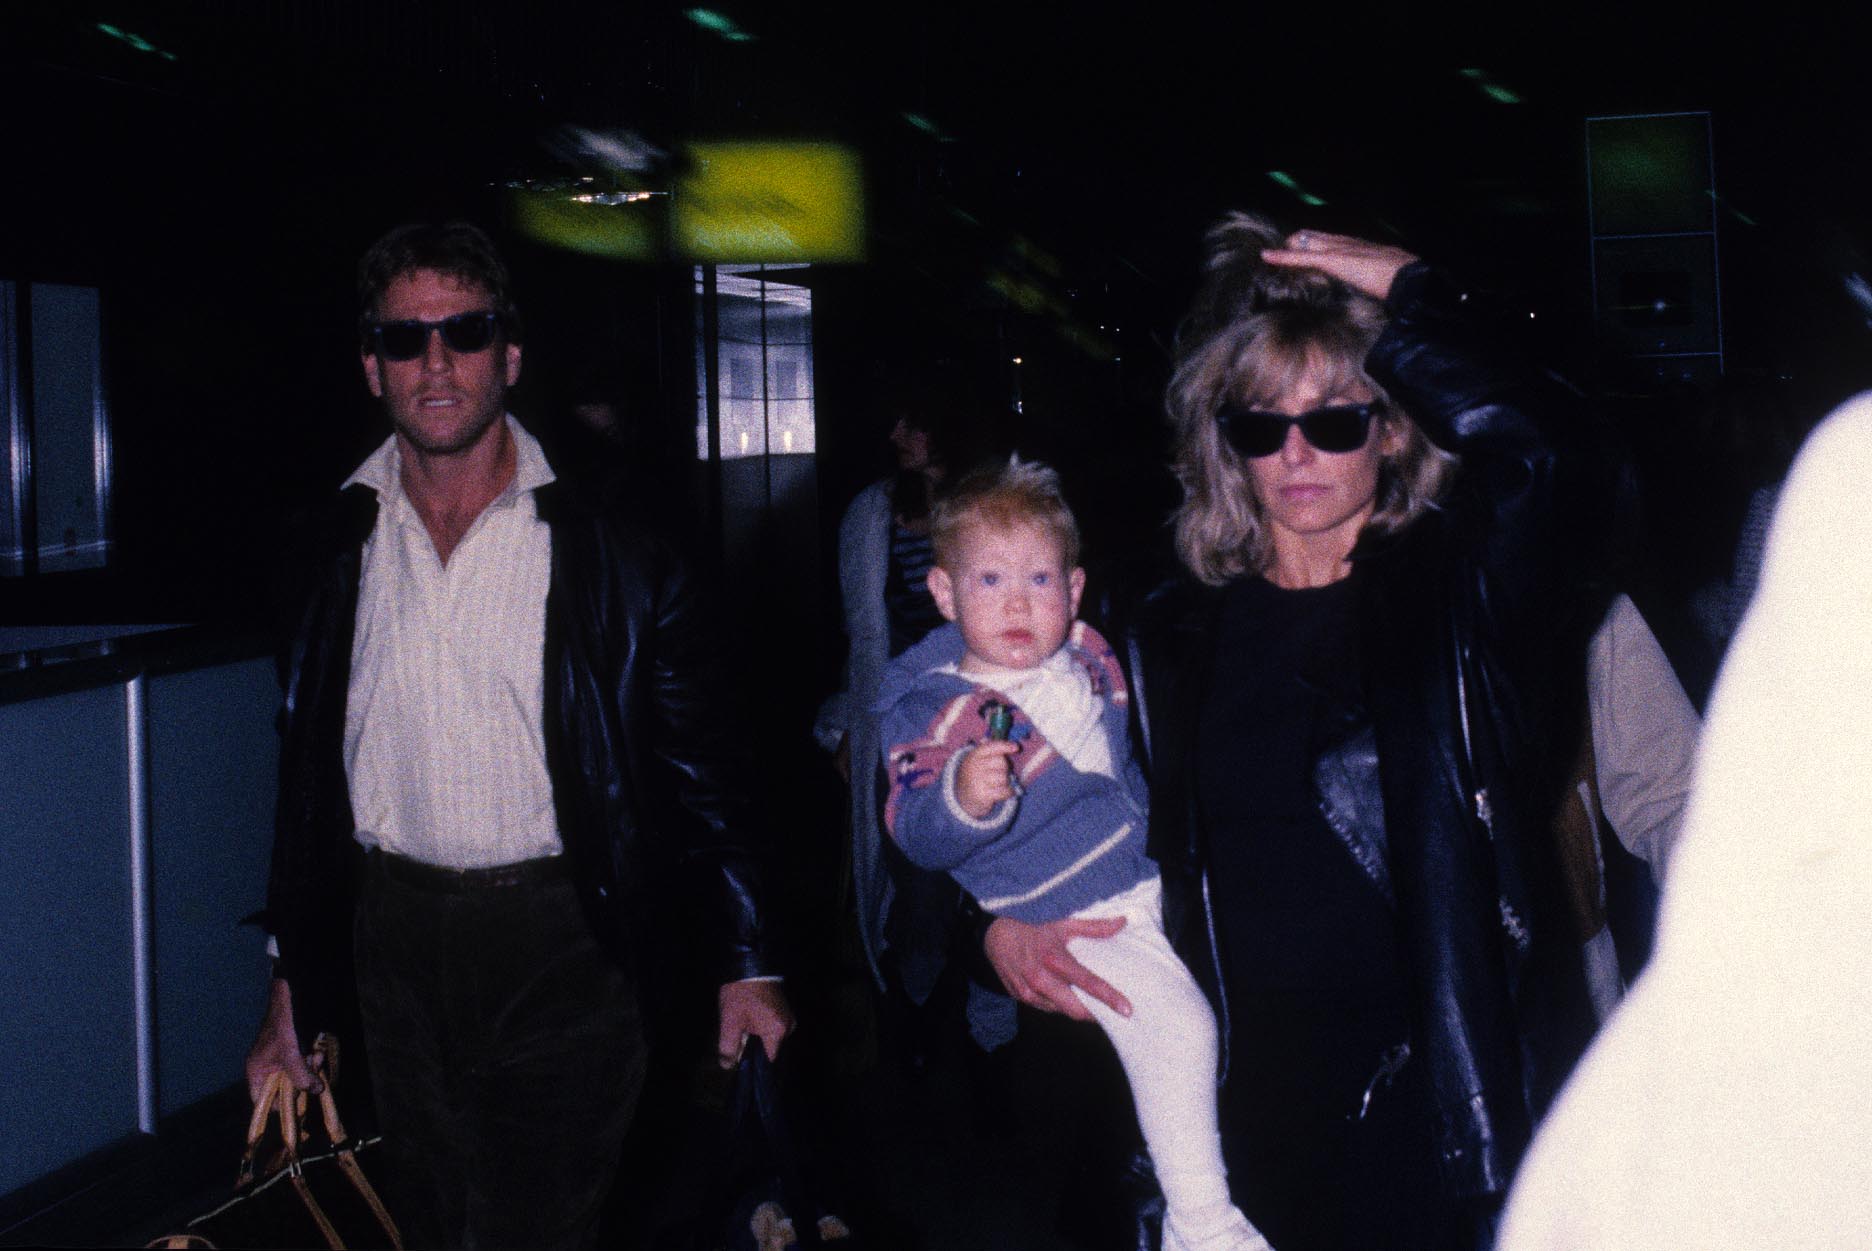 Ryan O'Neal in sunglasses walking next to Farrah Fawcett, who is holding their son Redmond